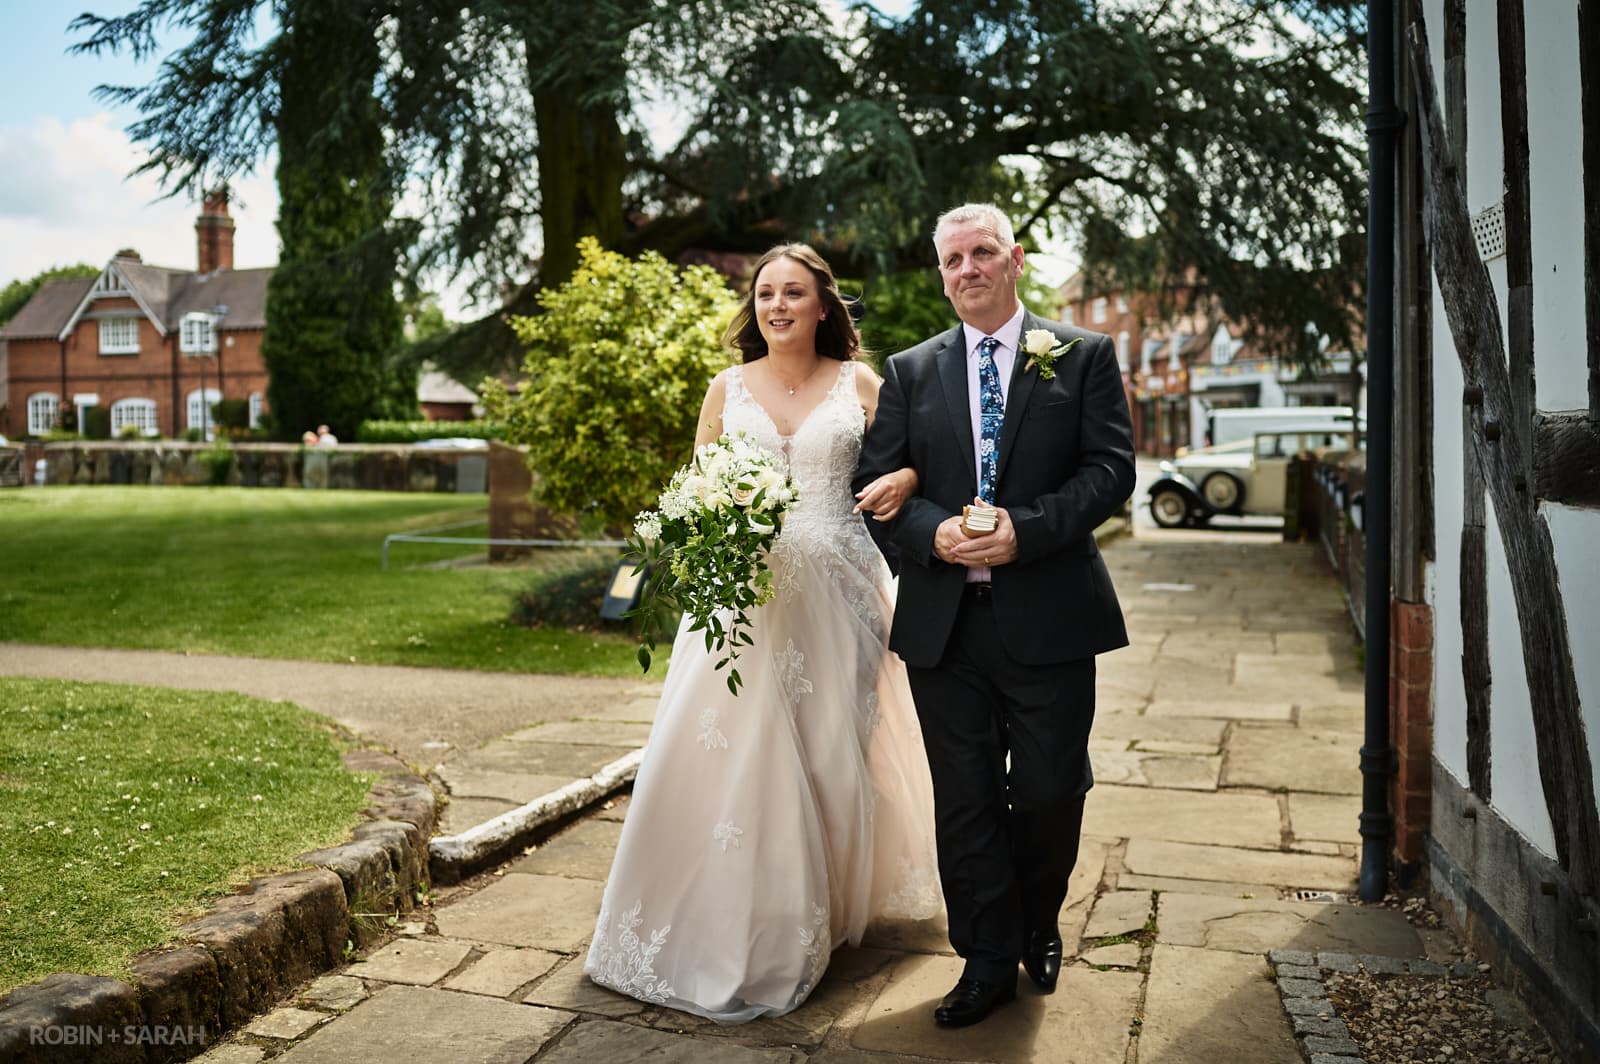 Bride and dad walk up pathway to church